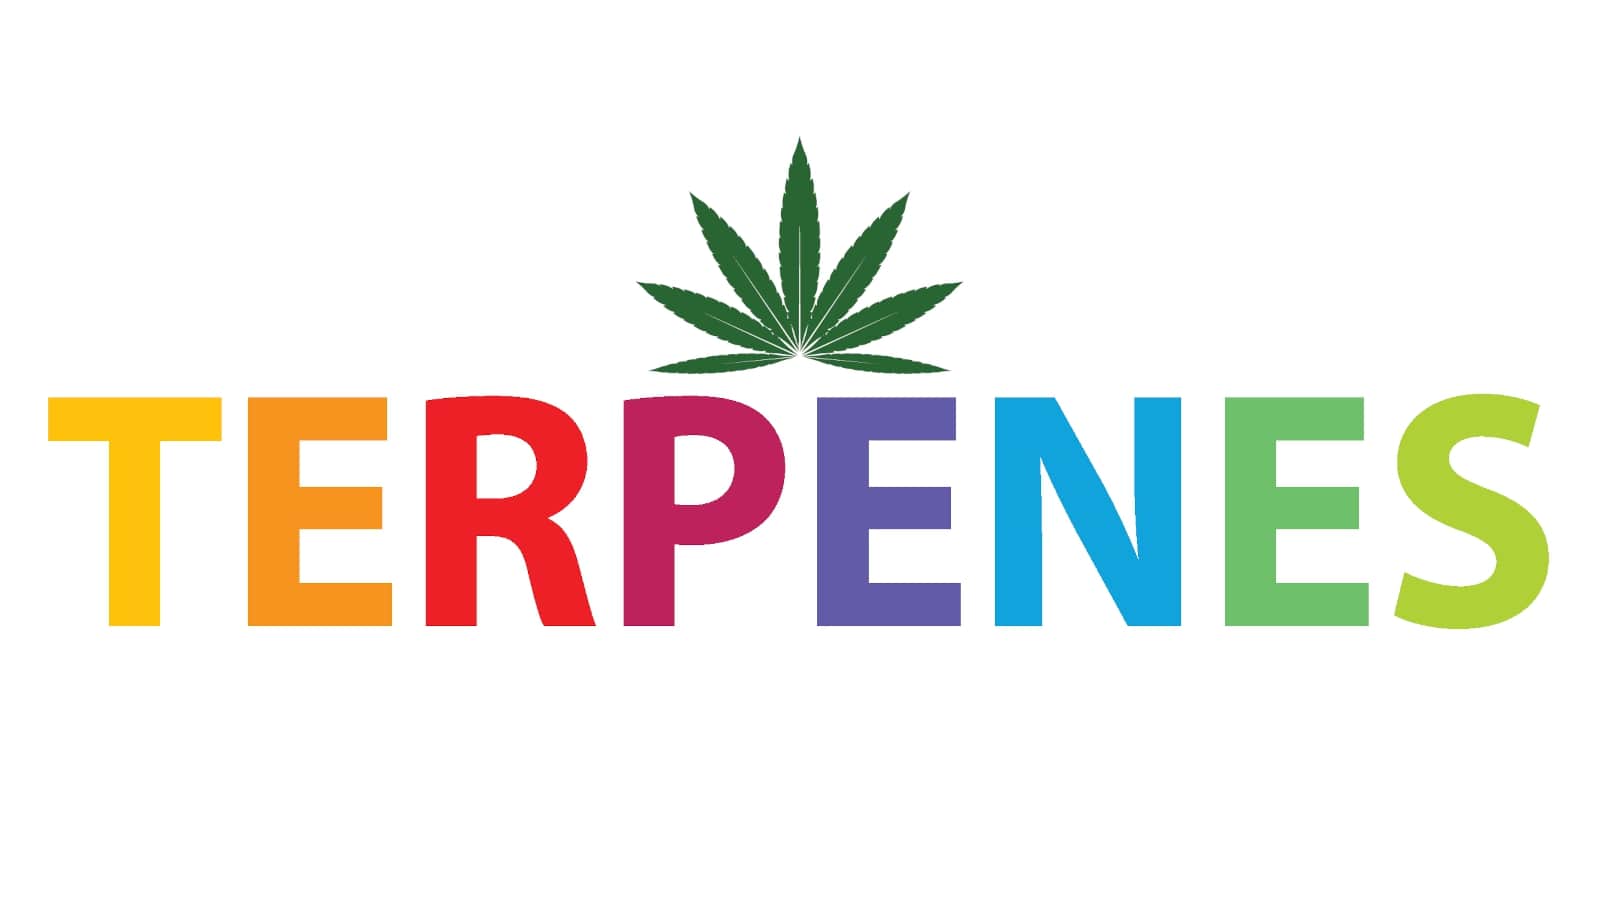 Cannabis Terpenes: What Are They And What Do They Do?